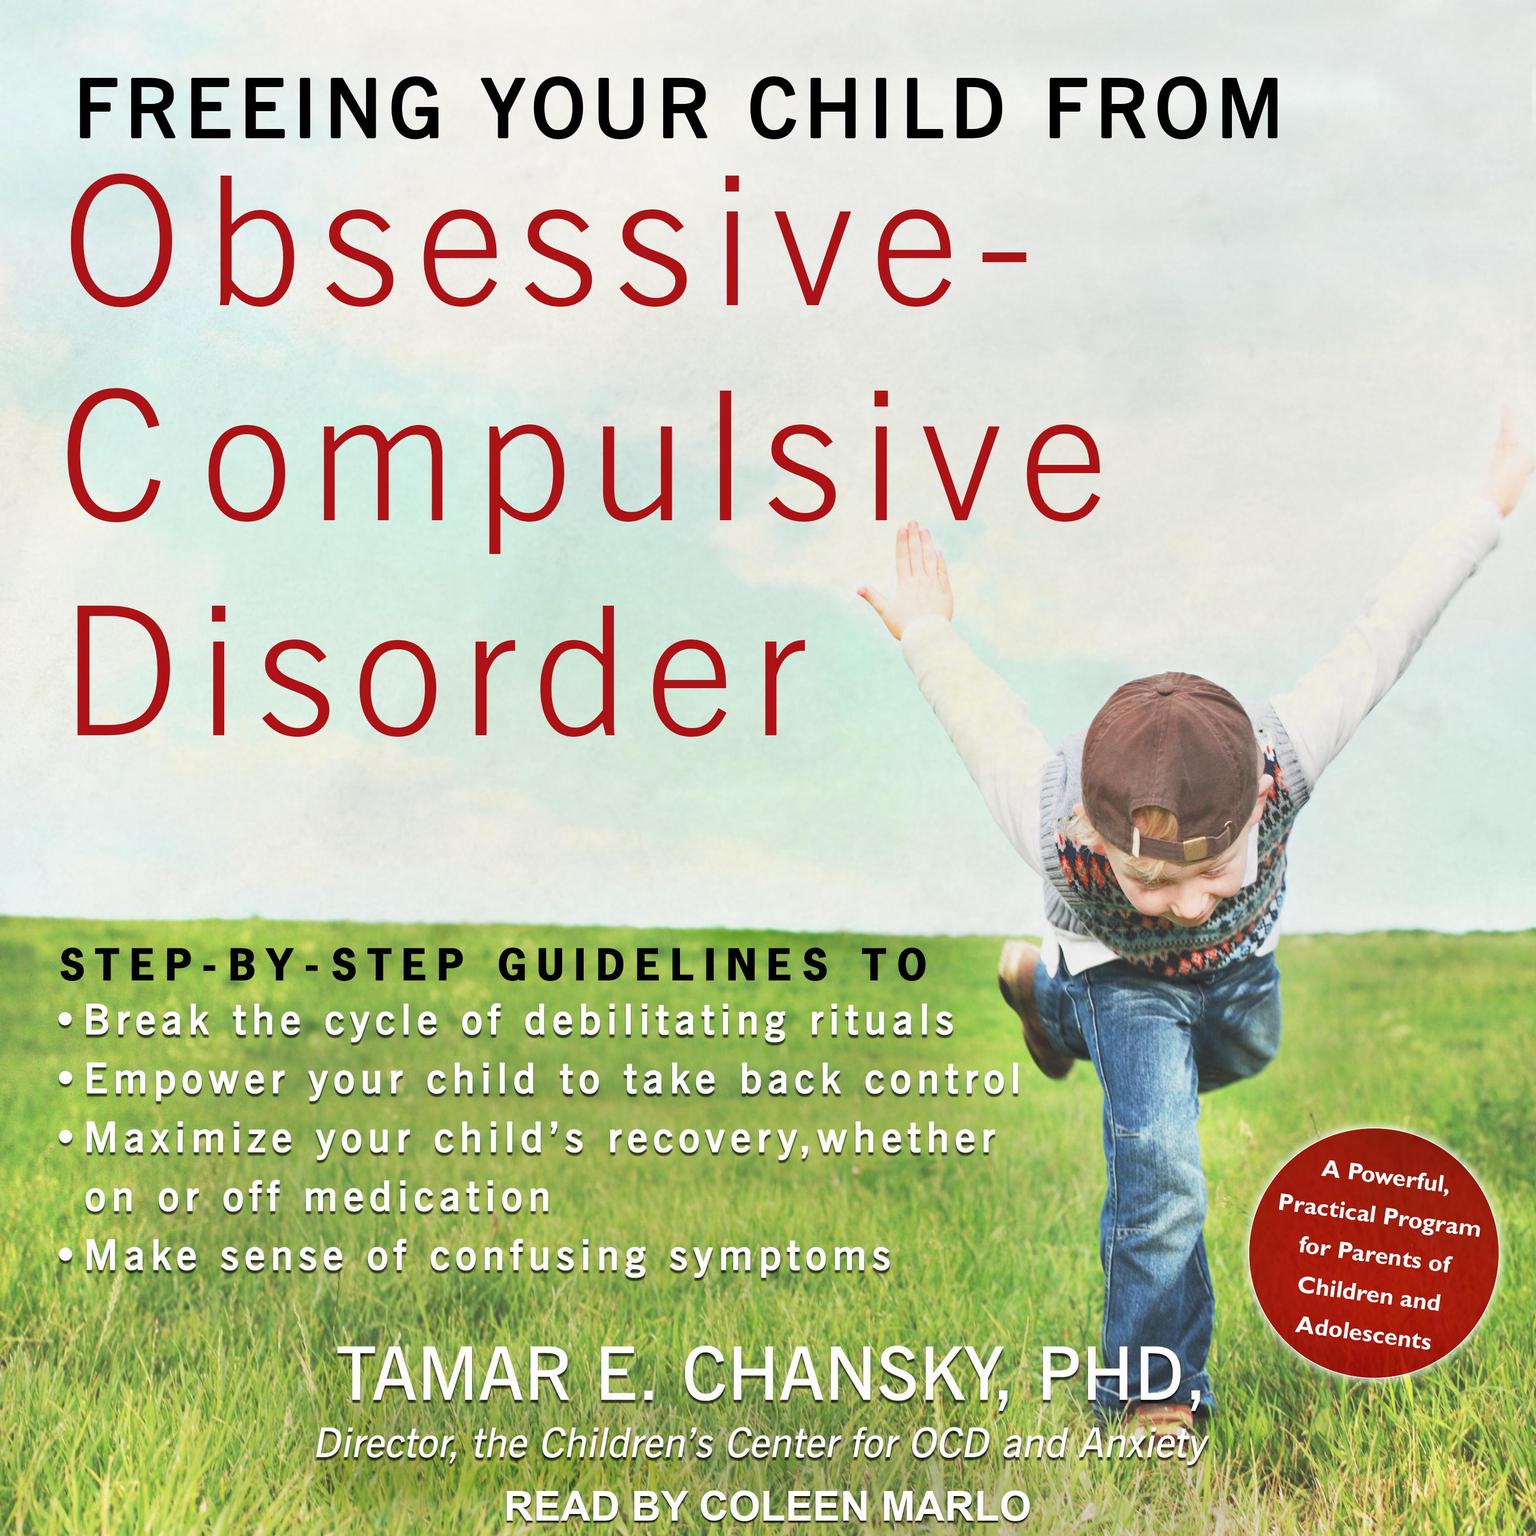 Freeing Your Child from Obsessive-Compulsive Disorder: A Powerful, Practical Program for Parents of Children and Adolescents Audiobook, by Tamar E. Chansky